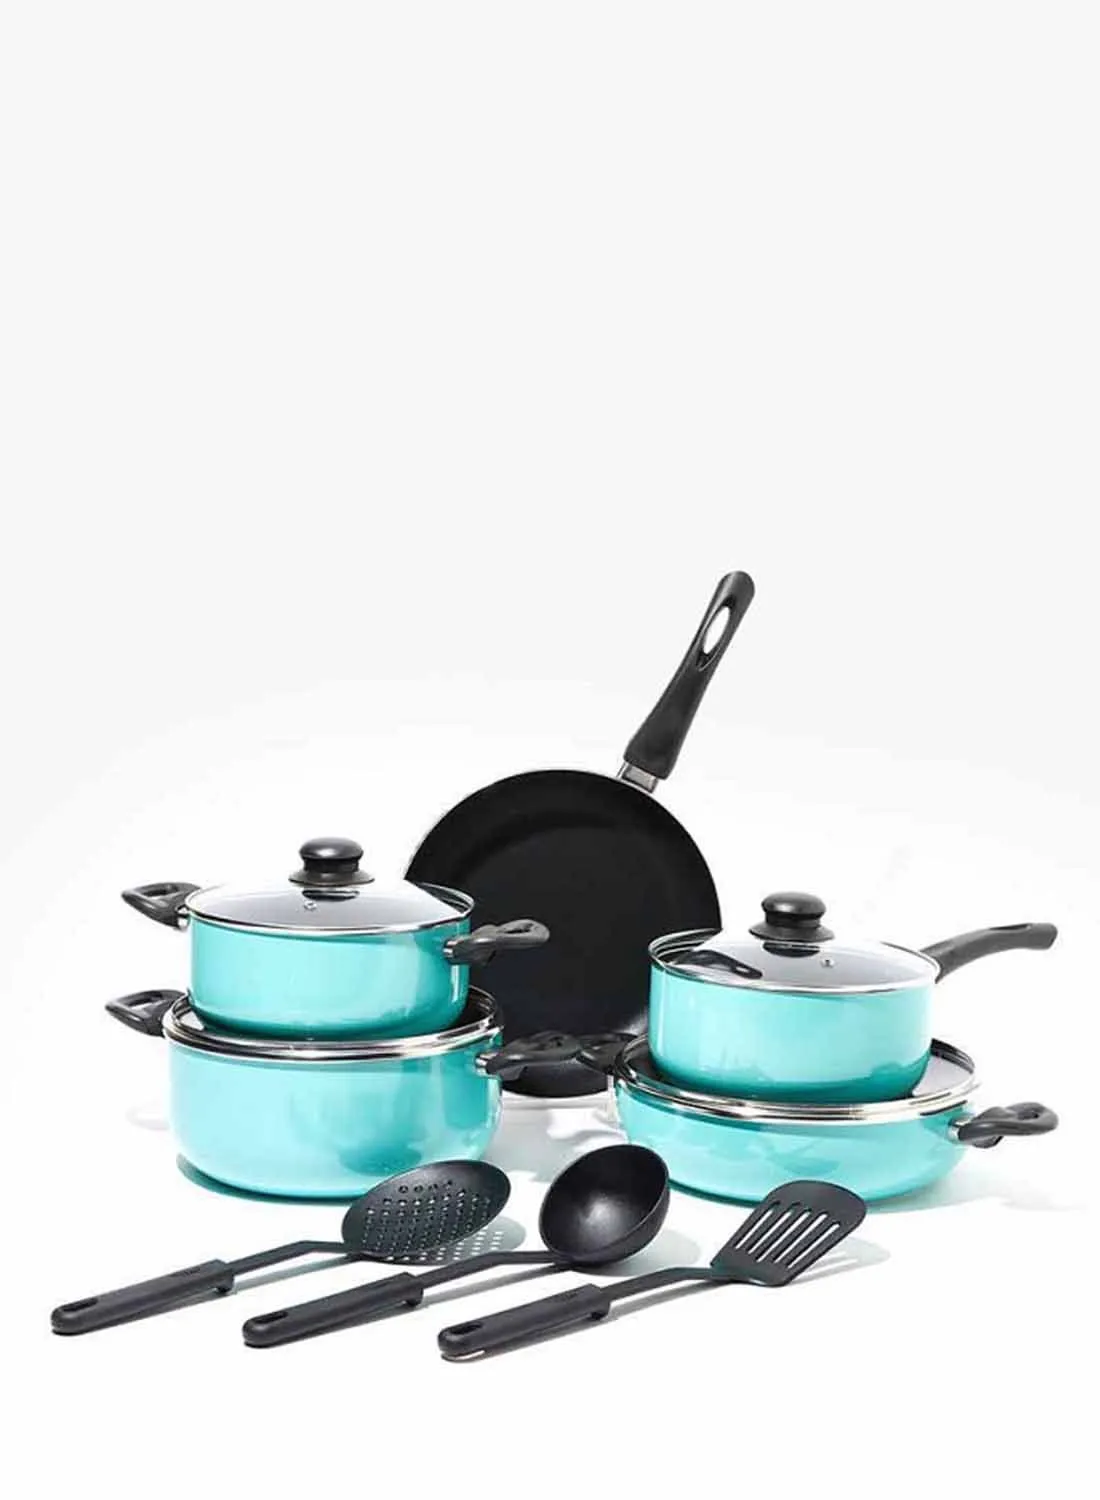 Amal 12-Piece 12 Piece Cookware Set - Aluminum Pots And Pans - Non-Stick Surface - Tempered Glass Lids - PFOA Free - Frying Pan, Casserole With Lid, Saucepan With Lid, Kitchen Tools - Mint Mint